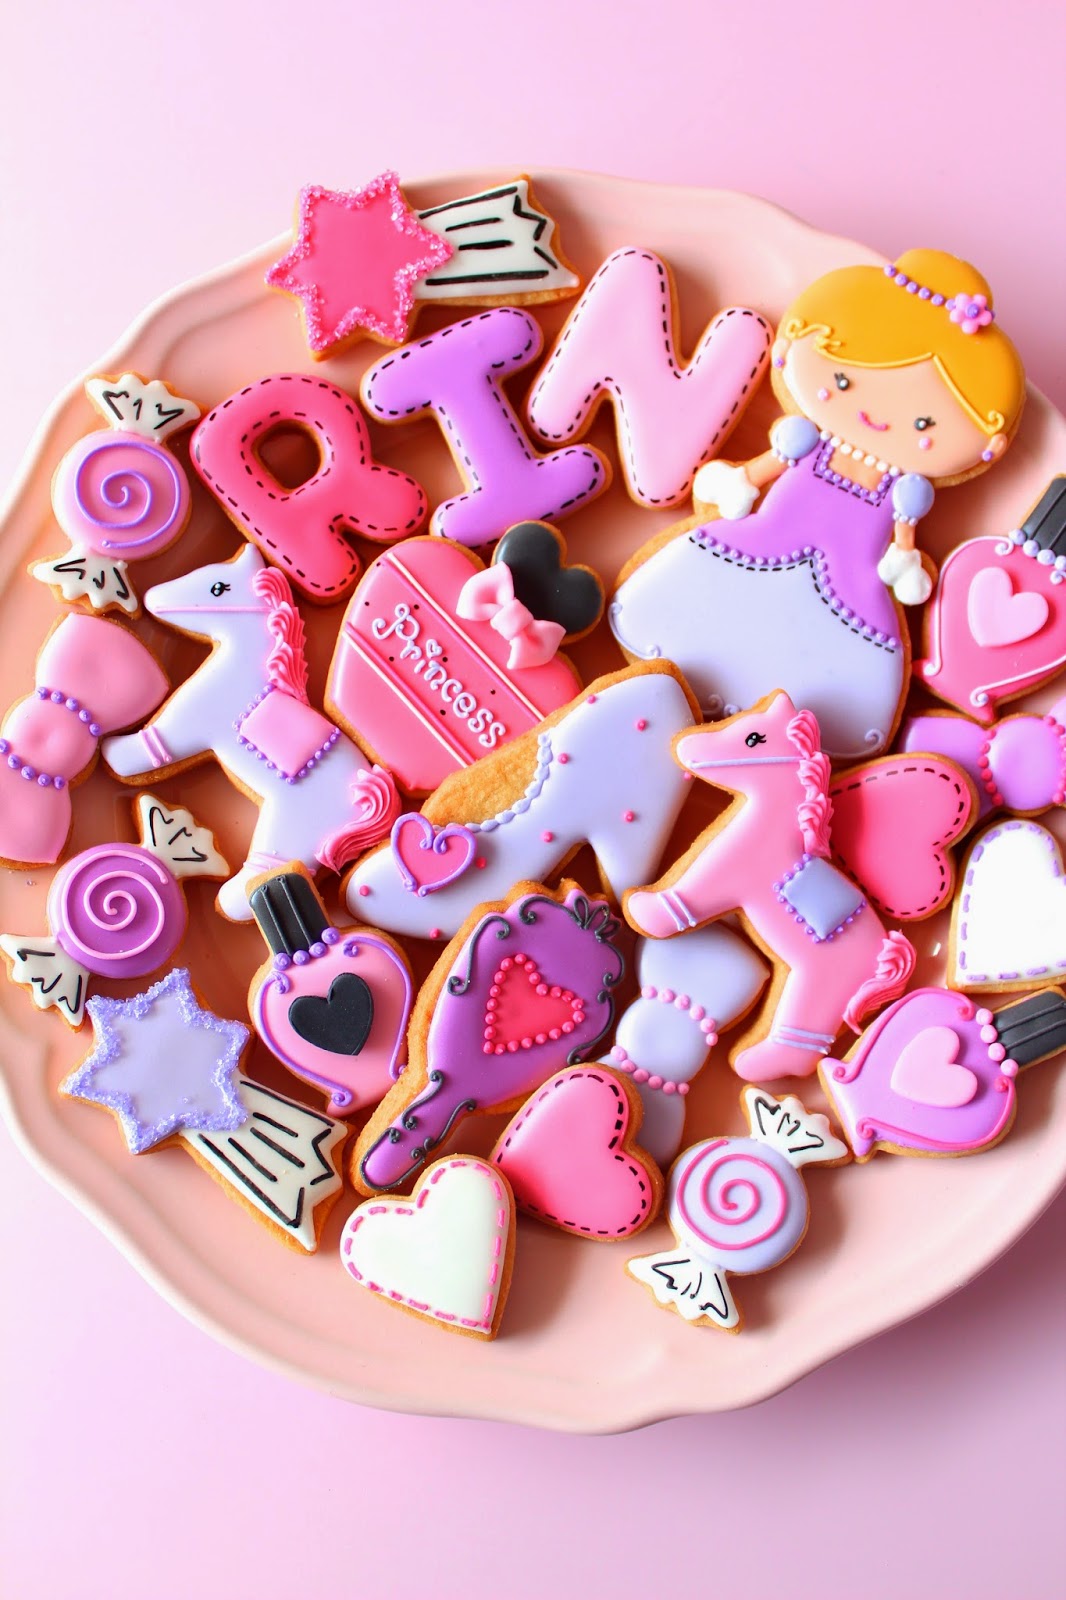 Sweeten Your Day プリンセス風アイシングクッキー Princess Icing Cookies